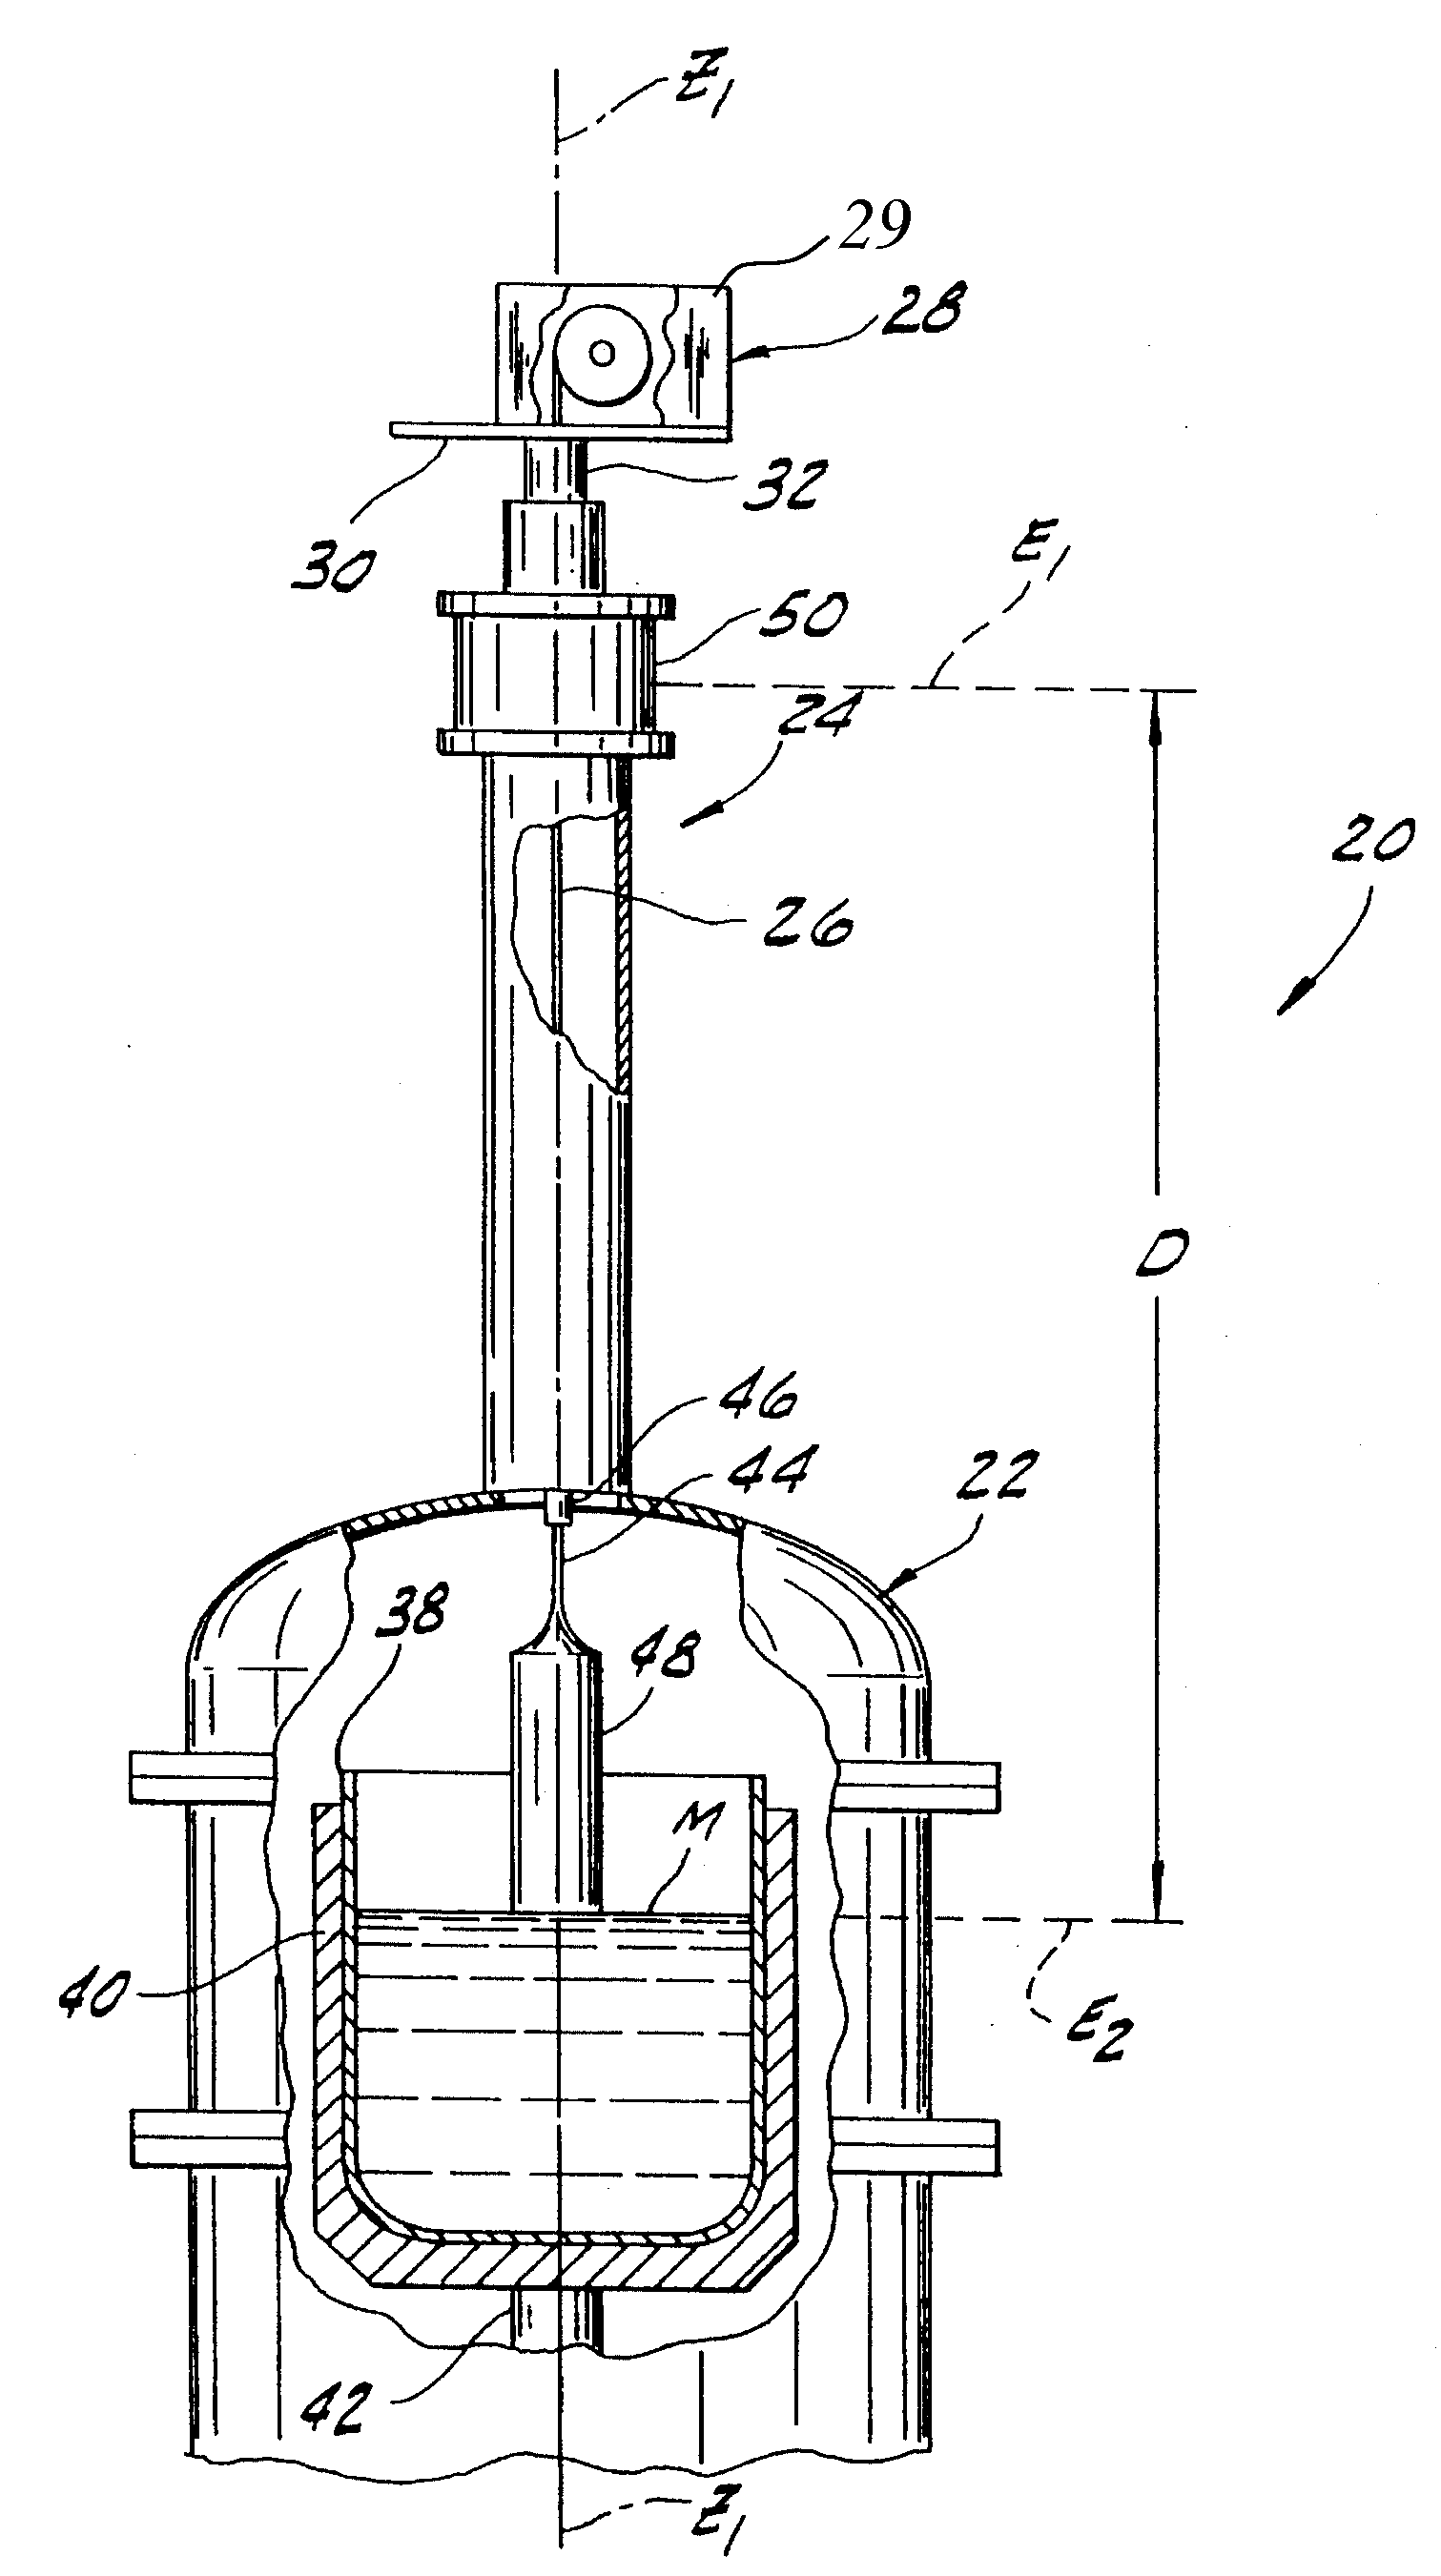 Systems for weighing a pulled object